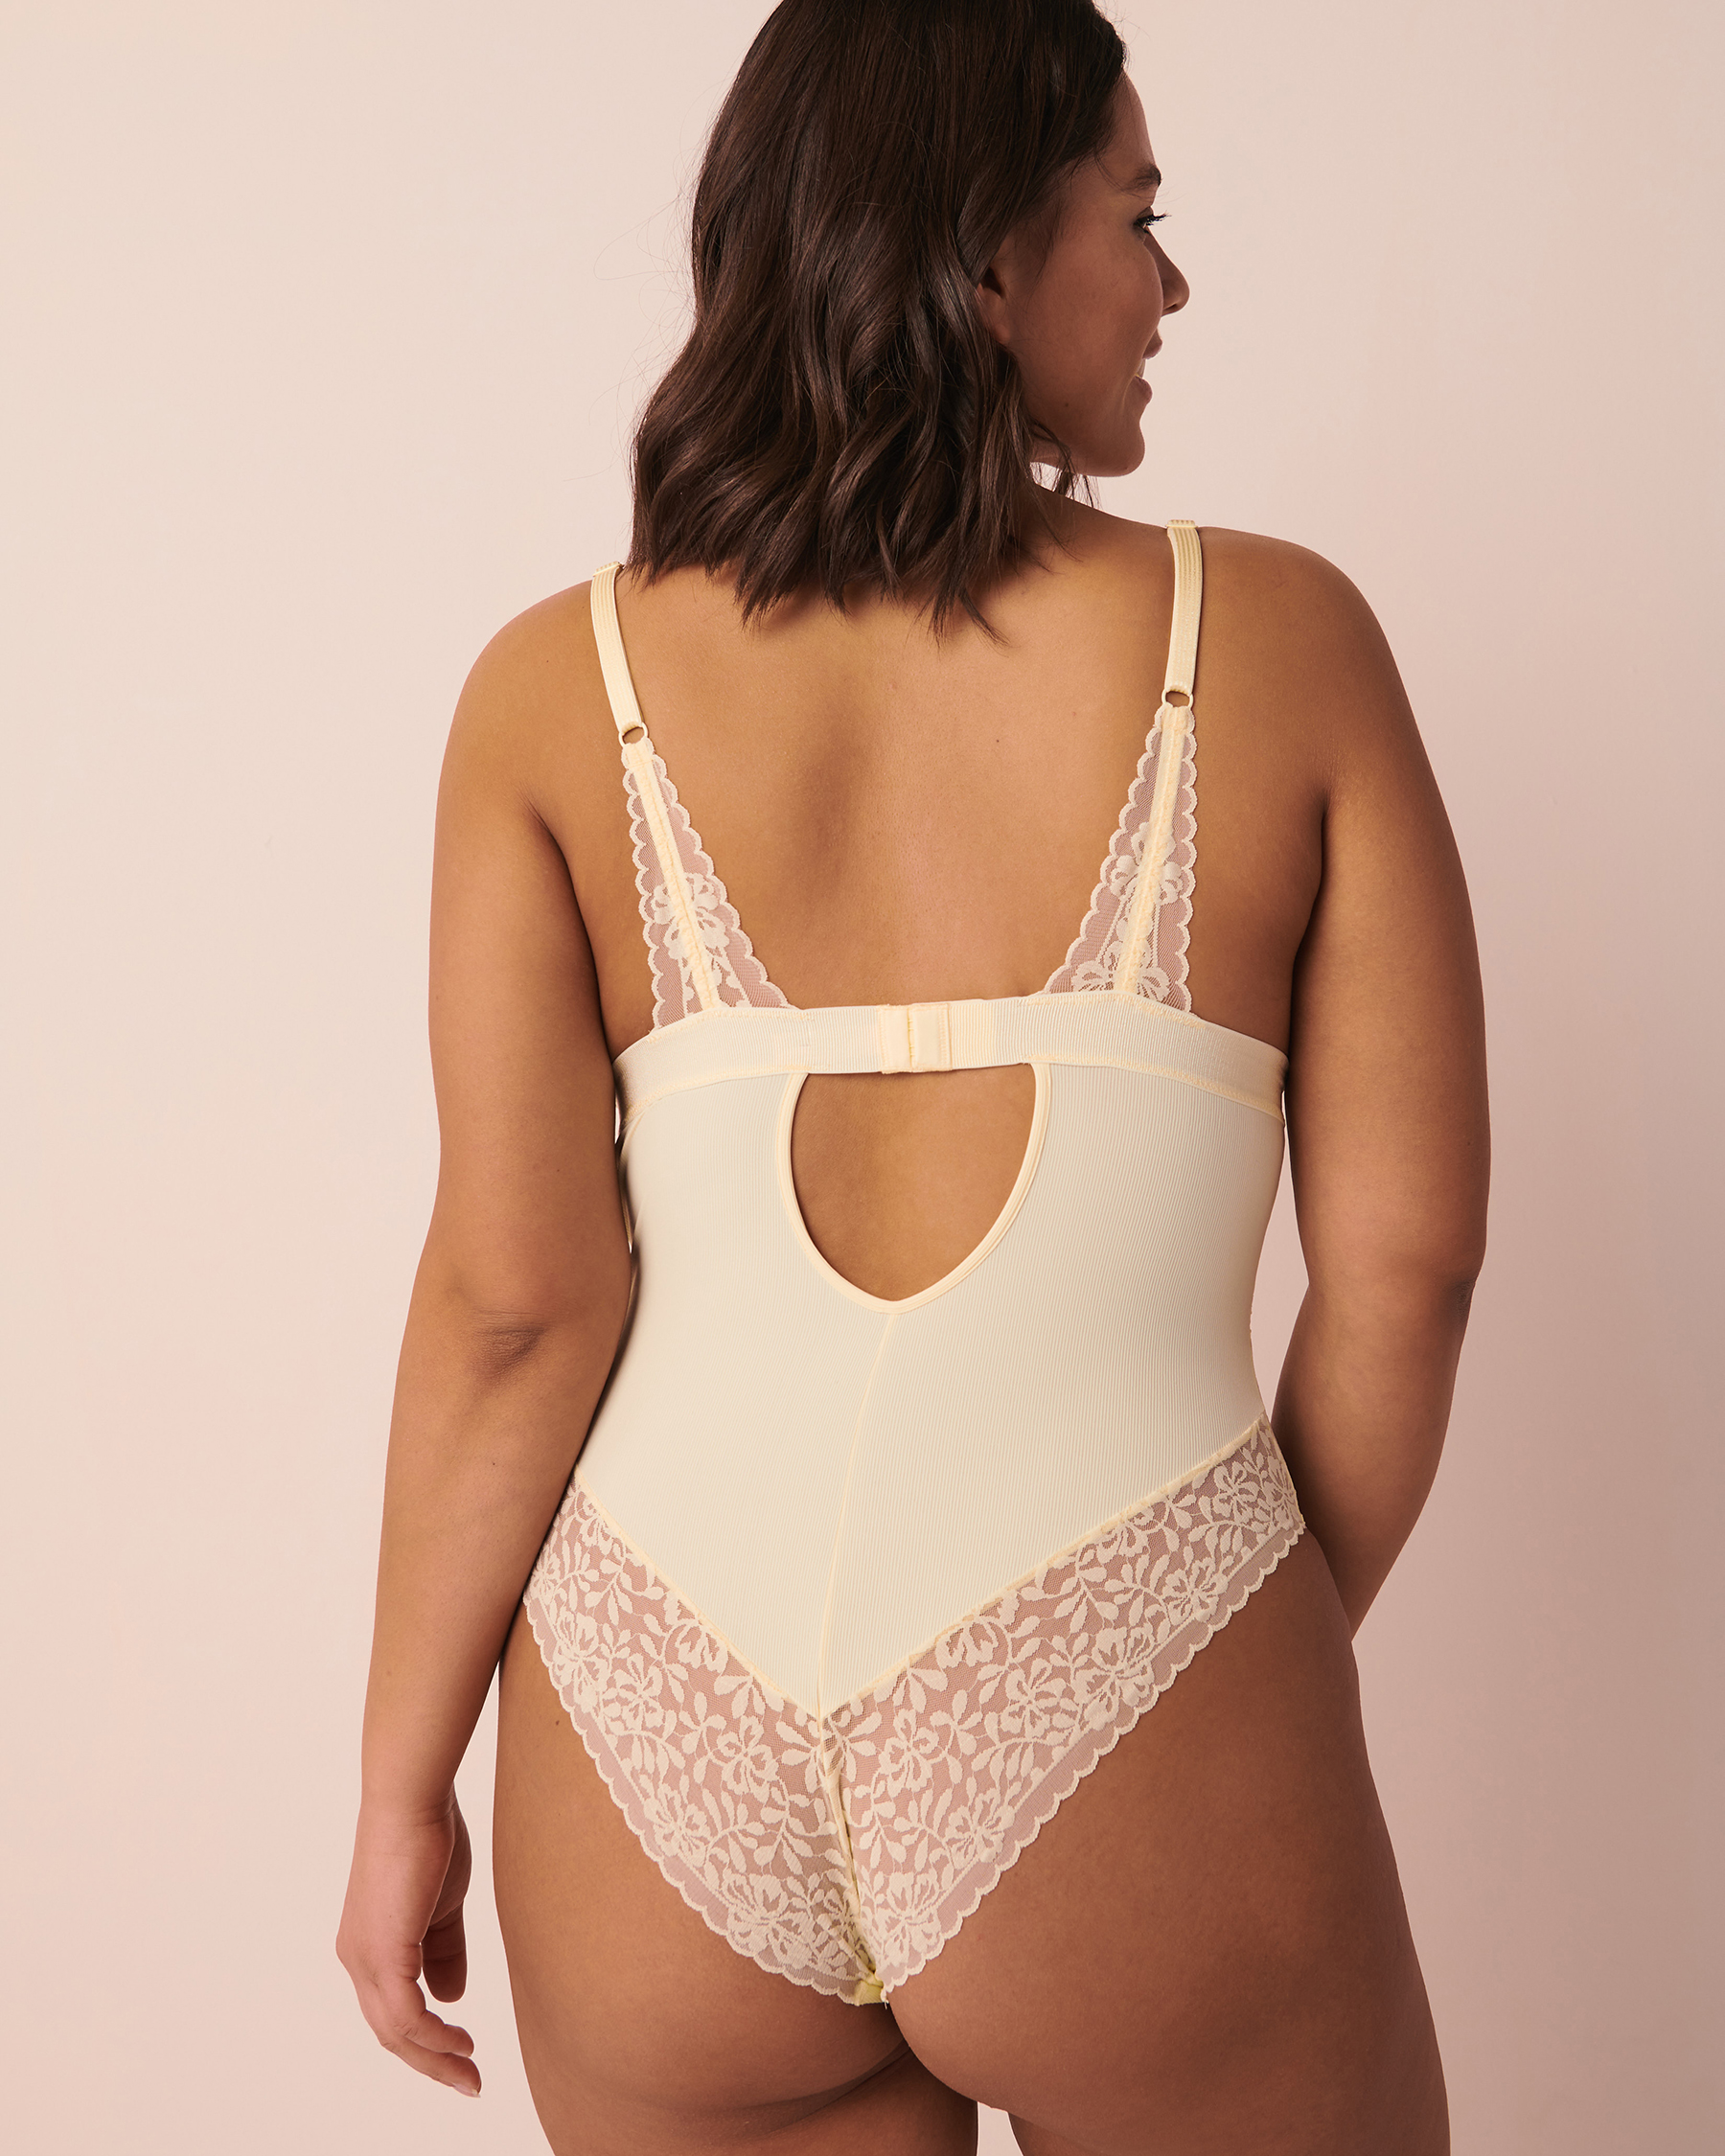 LA VIE EN ROSE Lace and Mesh Cheeky Teddy Light yellow 60300055 - View2